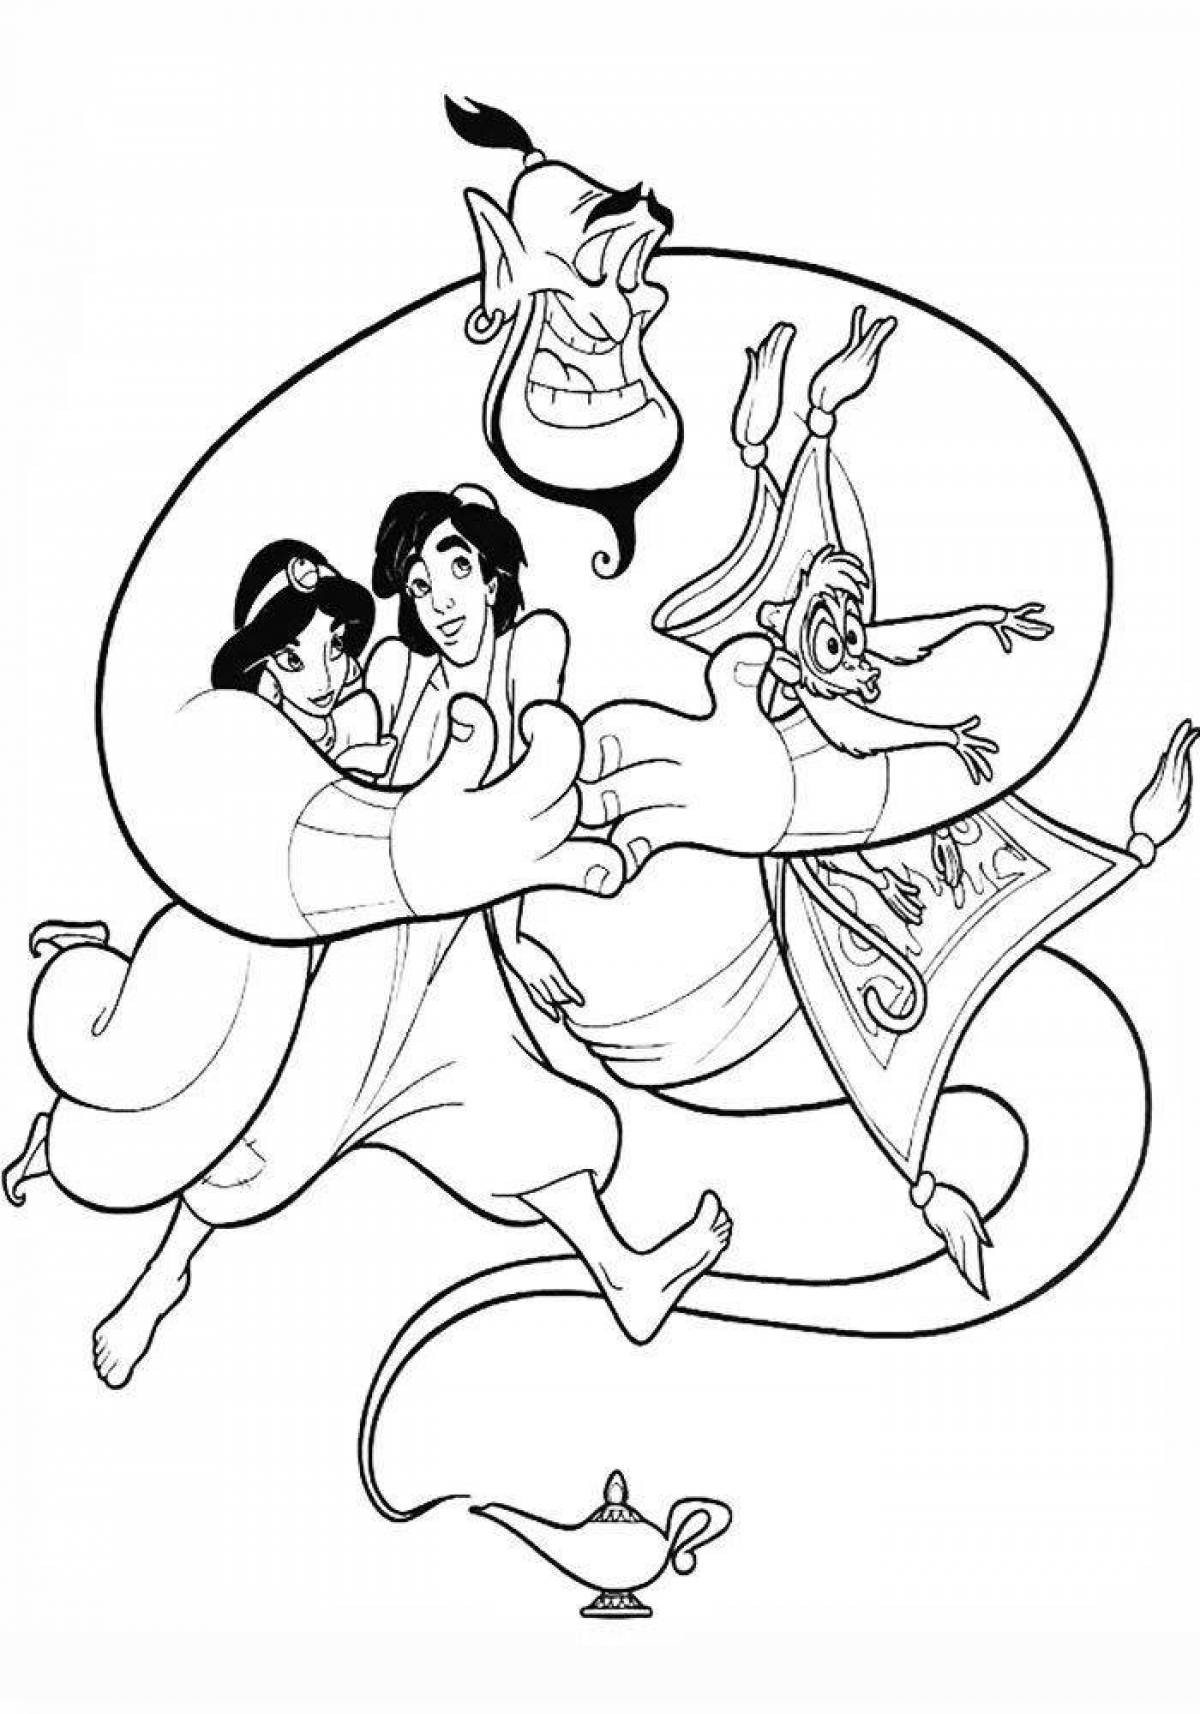 Aladin's dazzling coloring book